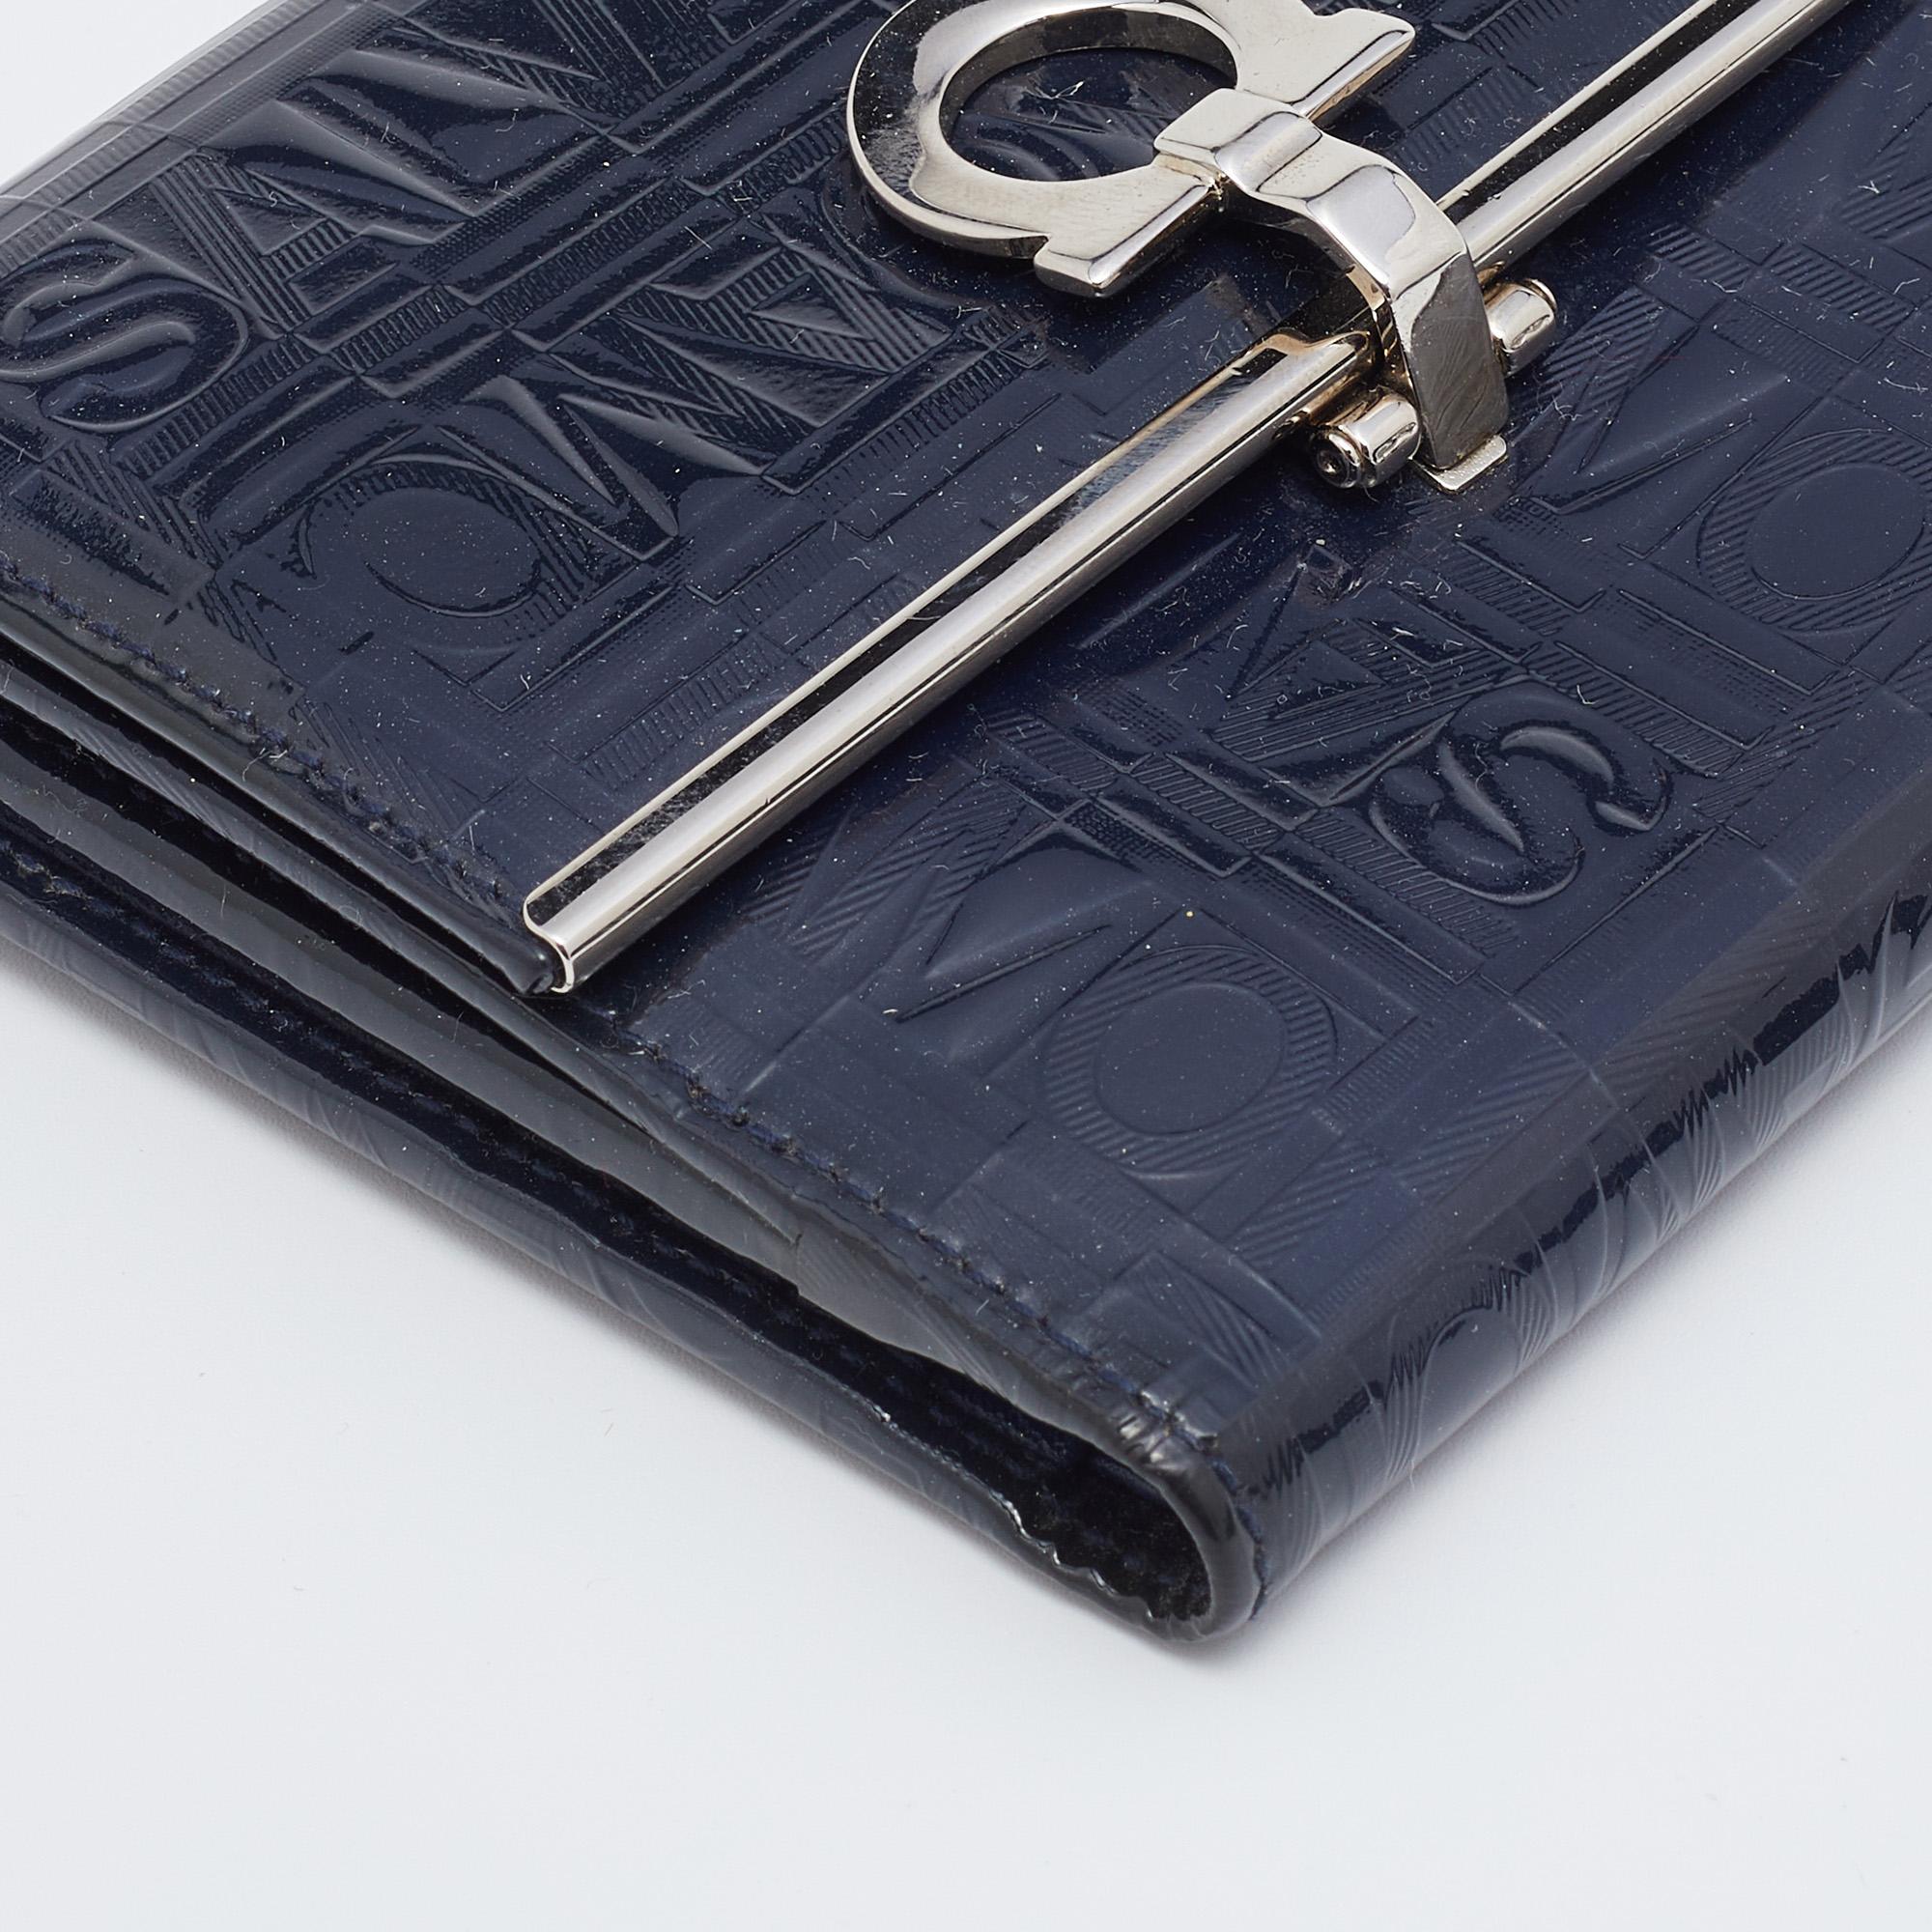 Infused with signature details, this Salvatore Ferragamo wallet will add a touch of luxury to your outfit. Crafted from logo-embossed patent leather, it displays a Gancini motif on the front and a compartmentalized interior.